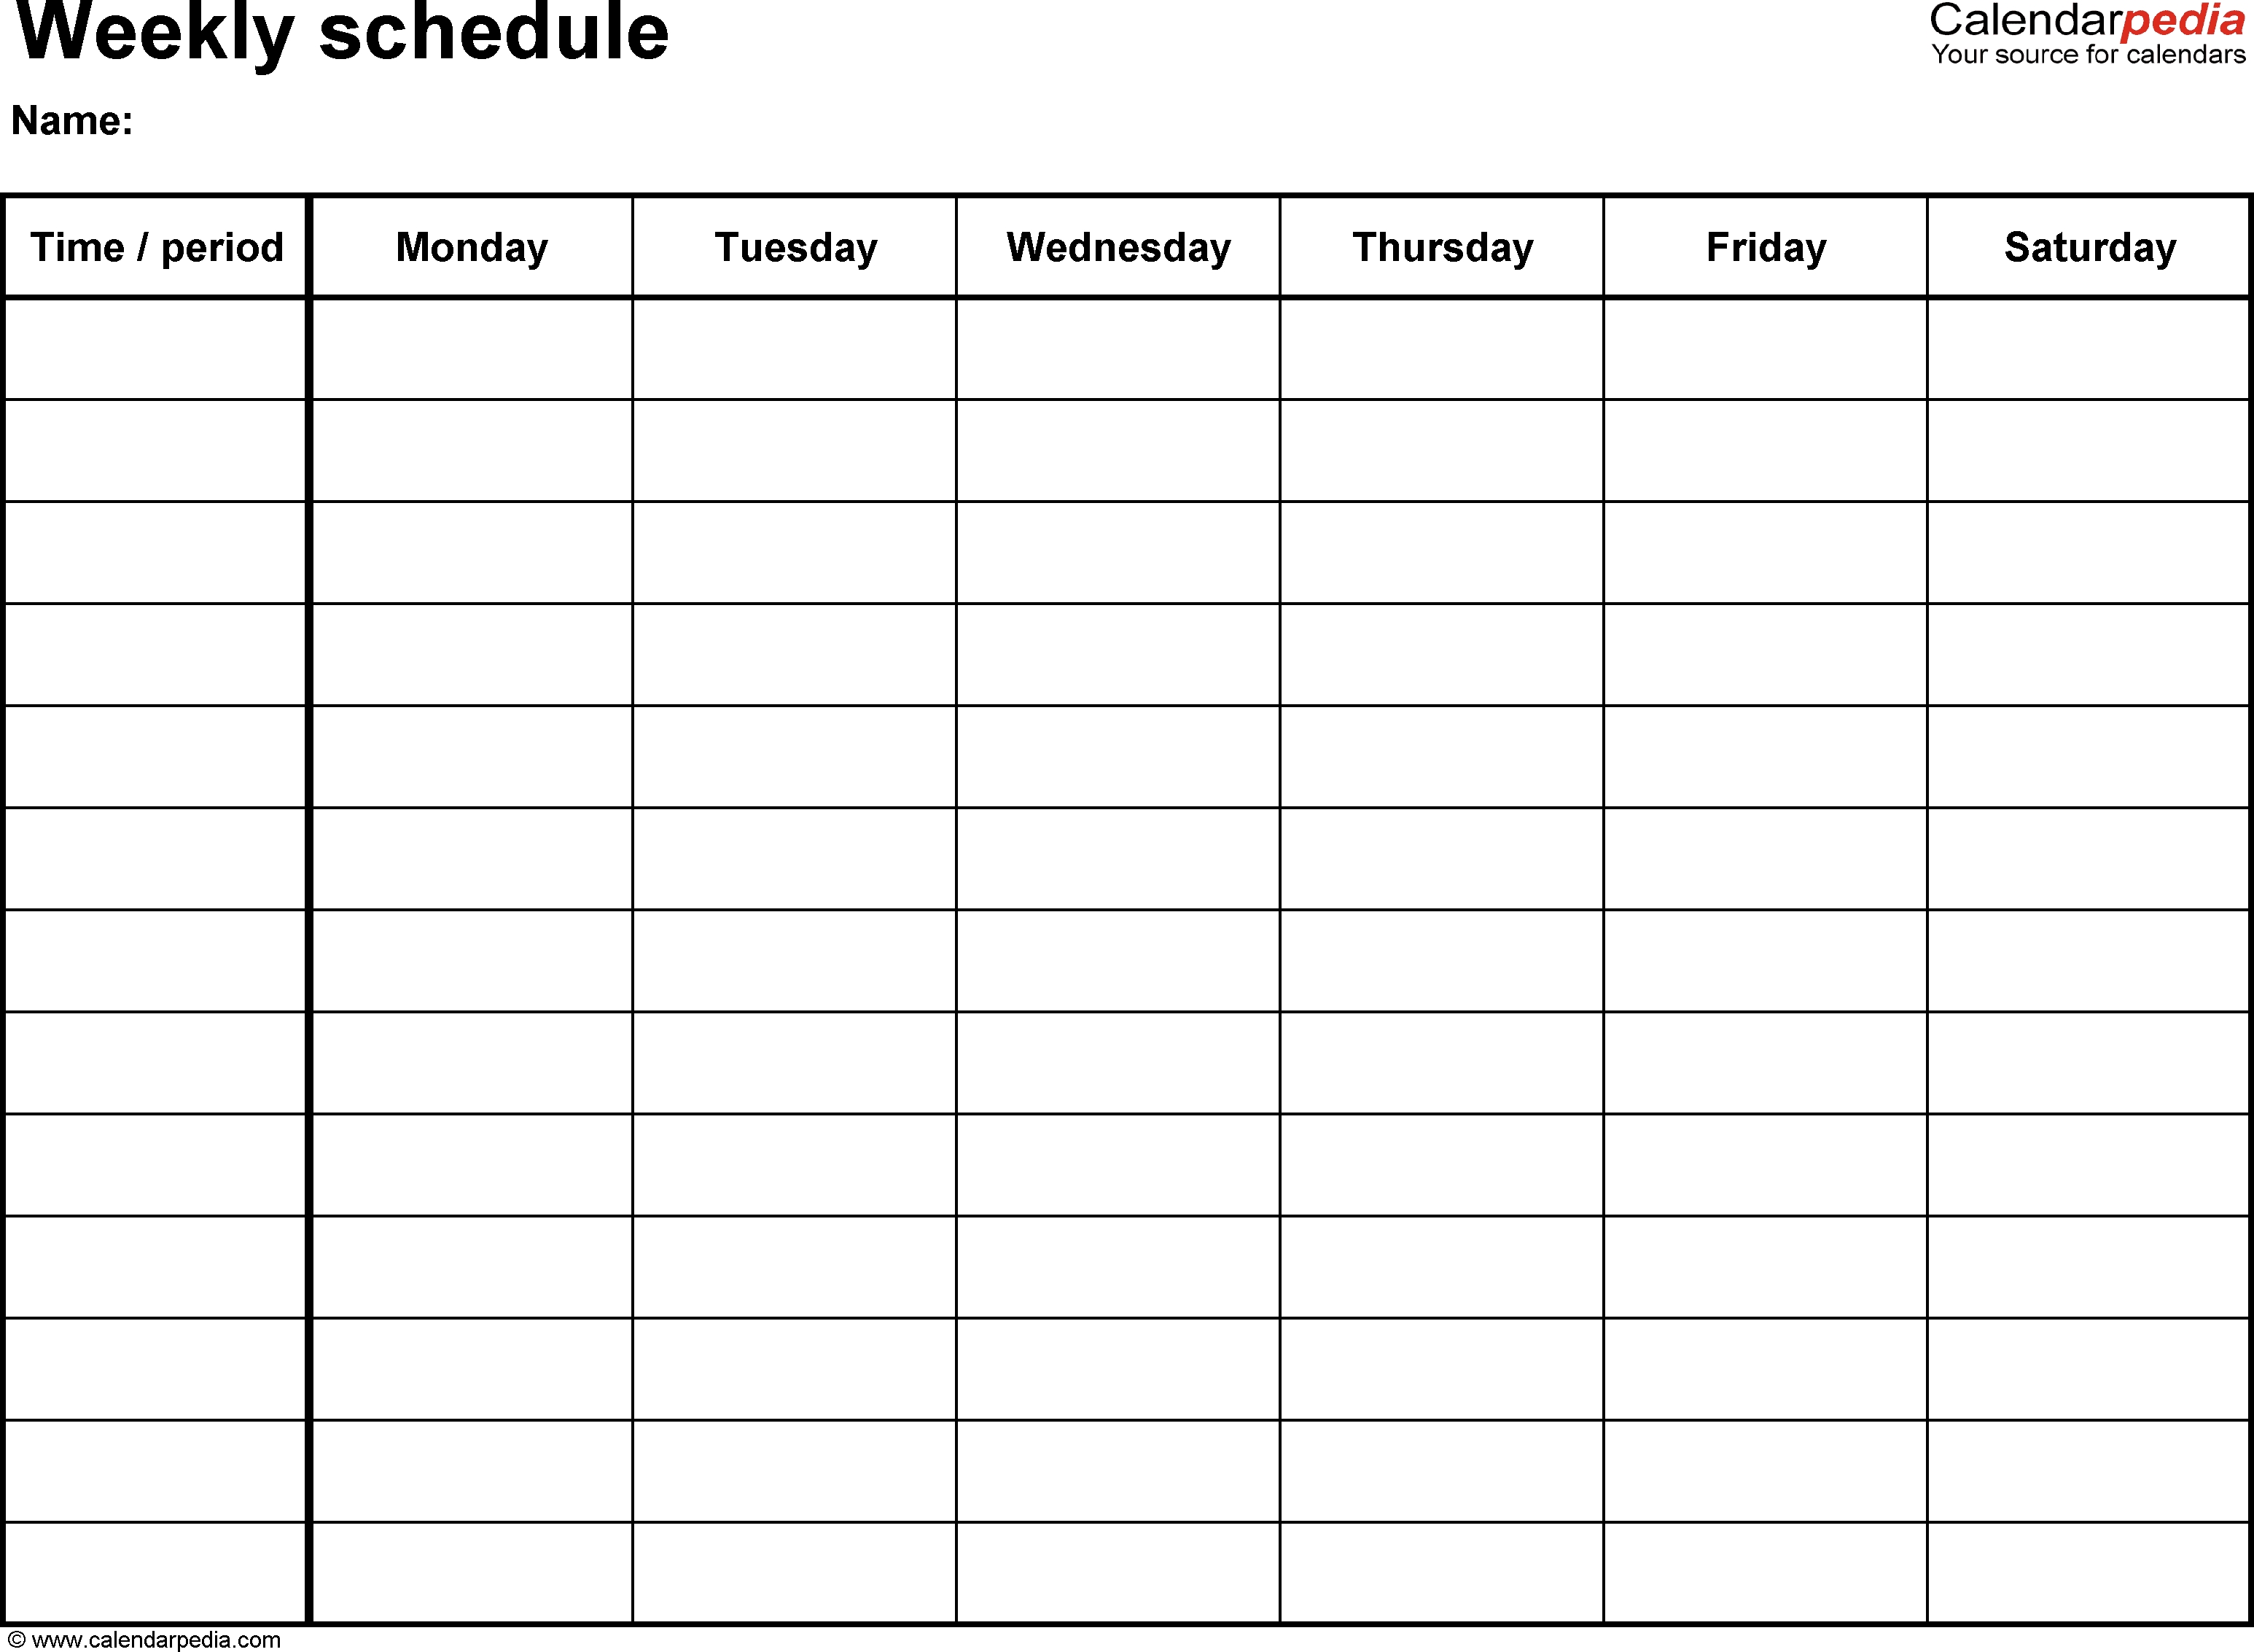 Free Weekly Schedule Templates For Word - 18 Templates in Monday Through Friday Schedule Printable